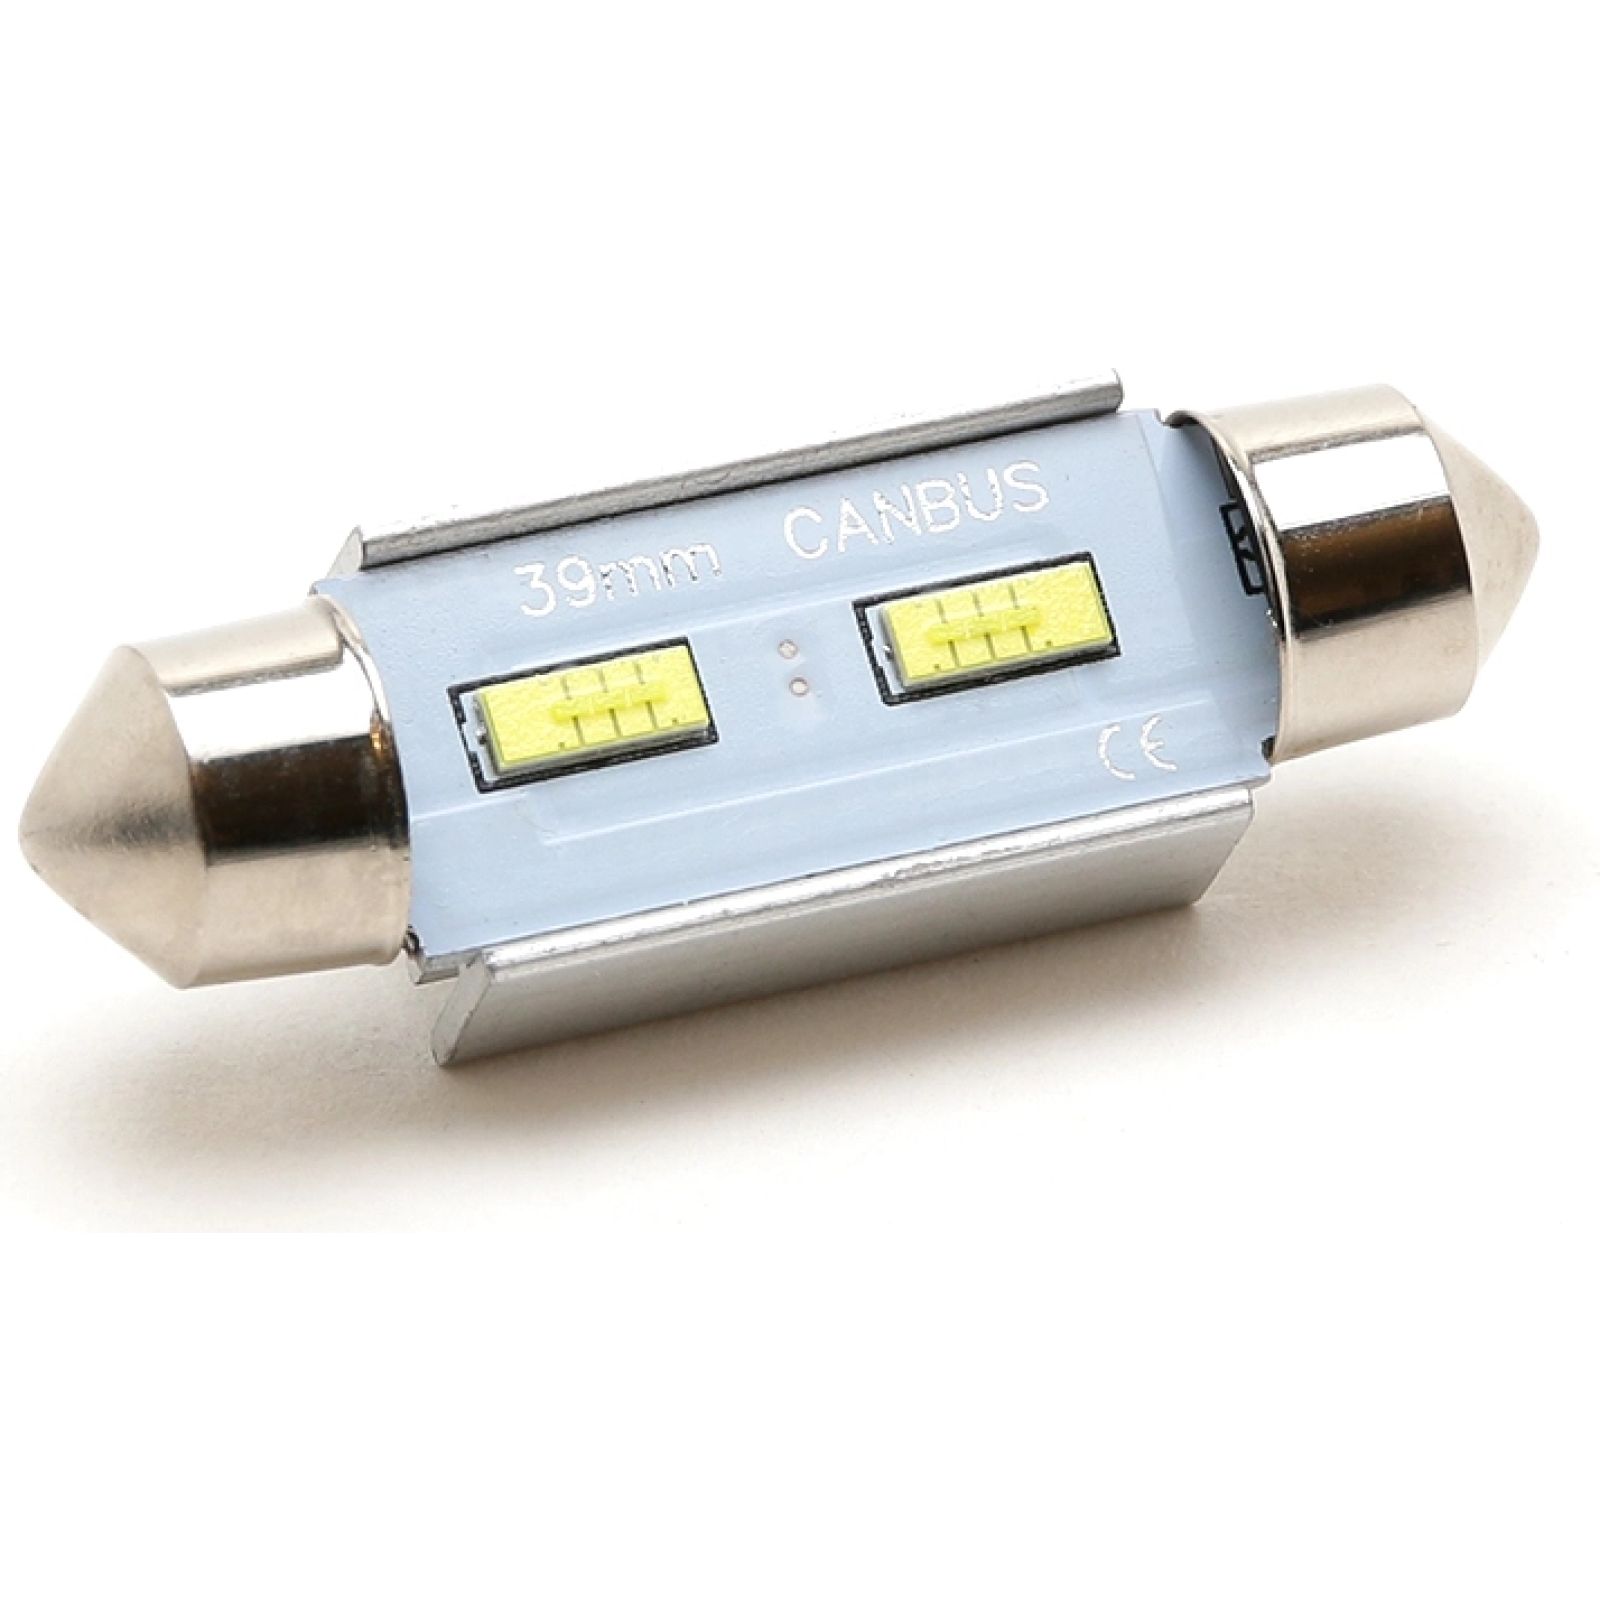 https://www.autoteile-store.at/img/product/led-soffitte-c5w-39mm-2x-2055-smd-weiss-250-lumen-canbus-2-stueck-24560-327981/0ddee000e7ae283acd768356eb977ab8_1600.jpg